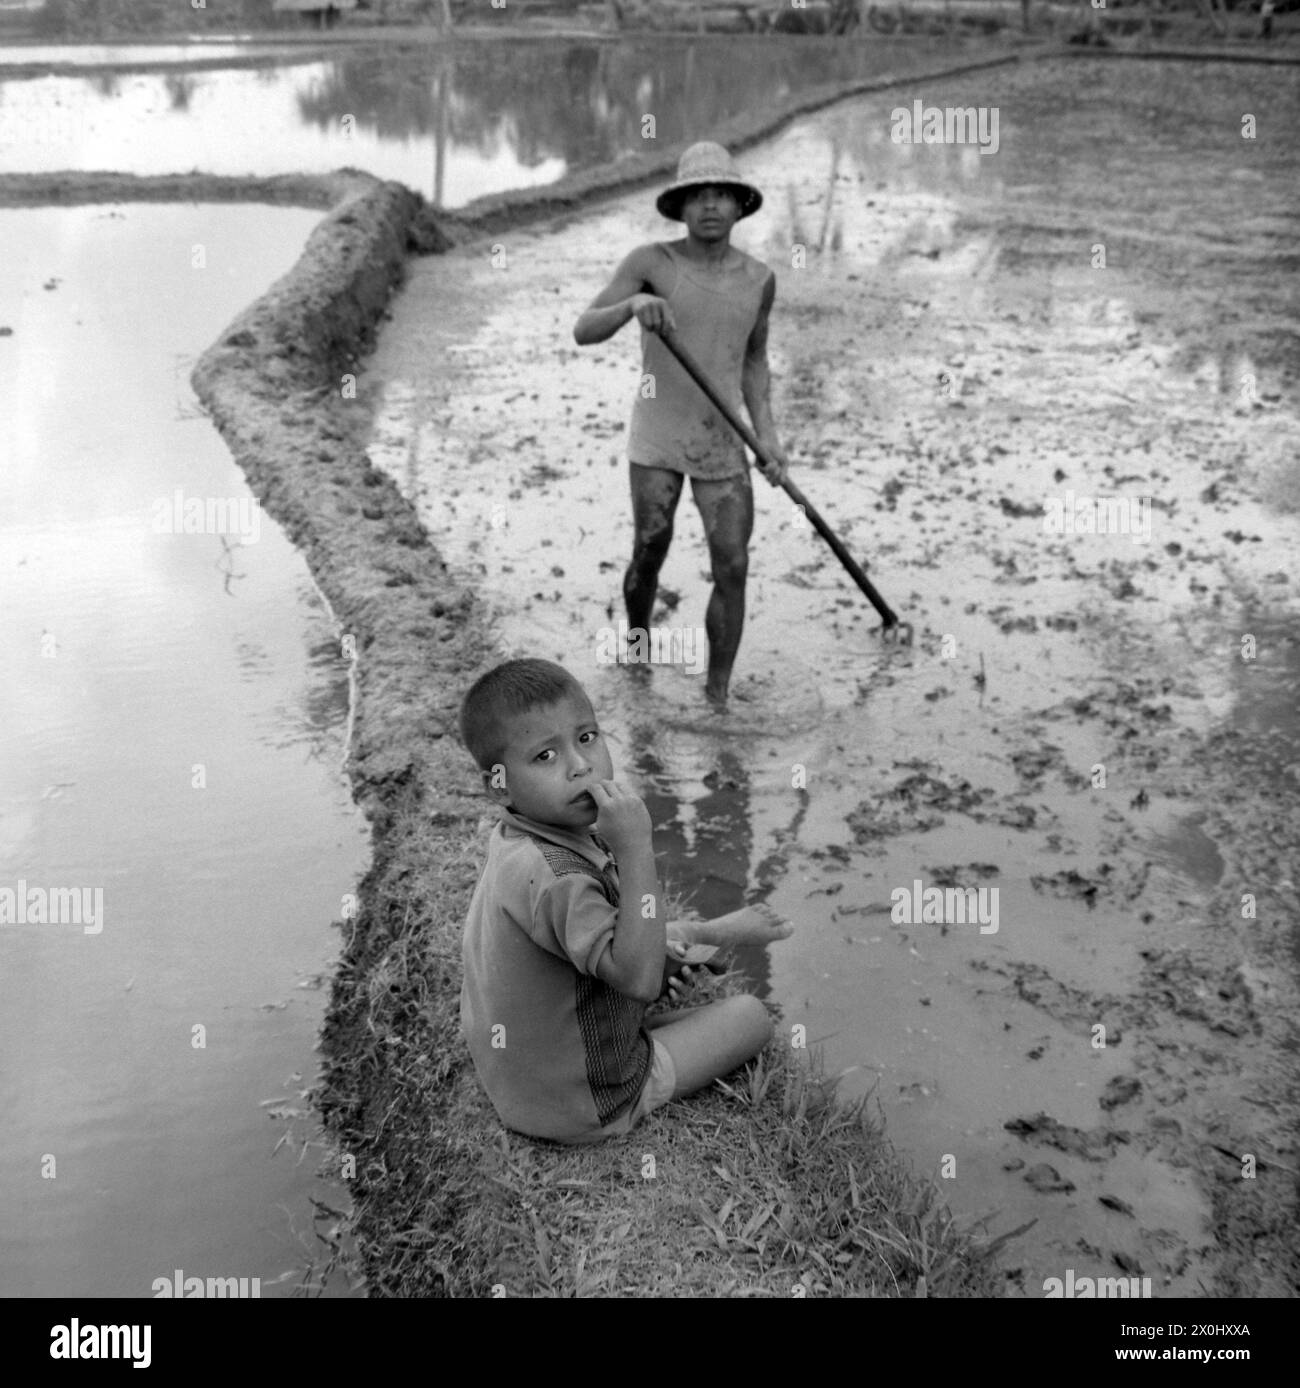 A small boy in shorts and a T-shirt is sitting on the edge of a rice field filled with water. An older boy in a tank top and hat is standing ankle-deep in the water of the field, his legs are smeared with earth and he is holding a hoe in his hands. [automated translation] Stock Photo